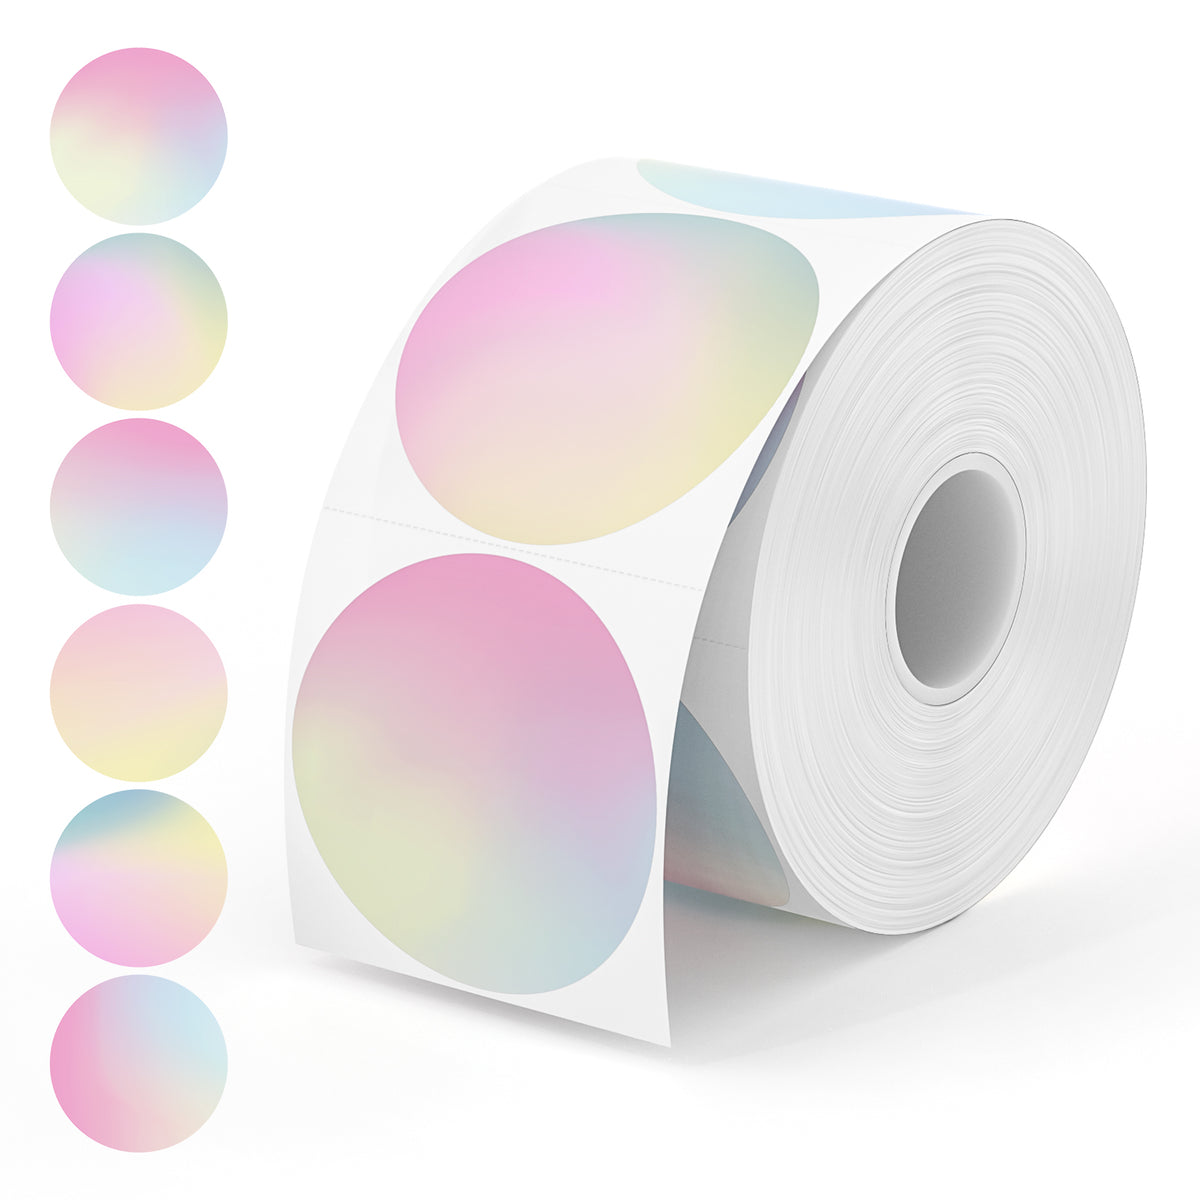 Discover the vibrant touch of MUNBYN's 6-in-1 Colorful Decorative Round Label Roll, combining six lively gradient hues in a single roll. 